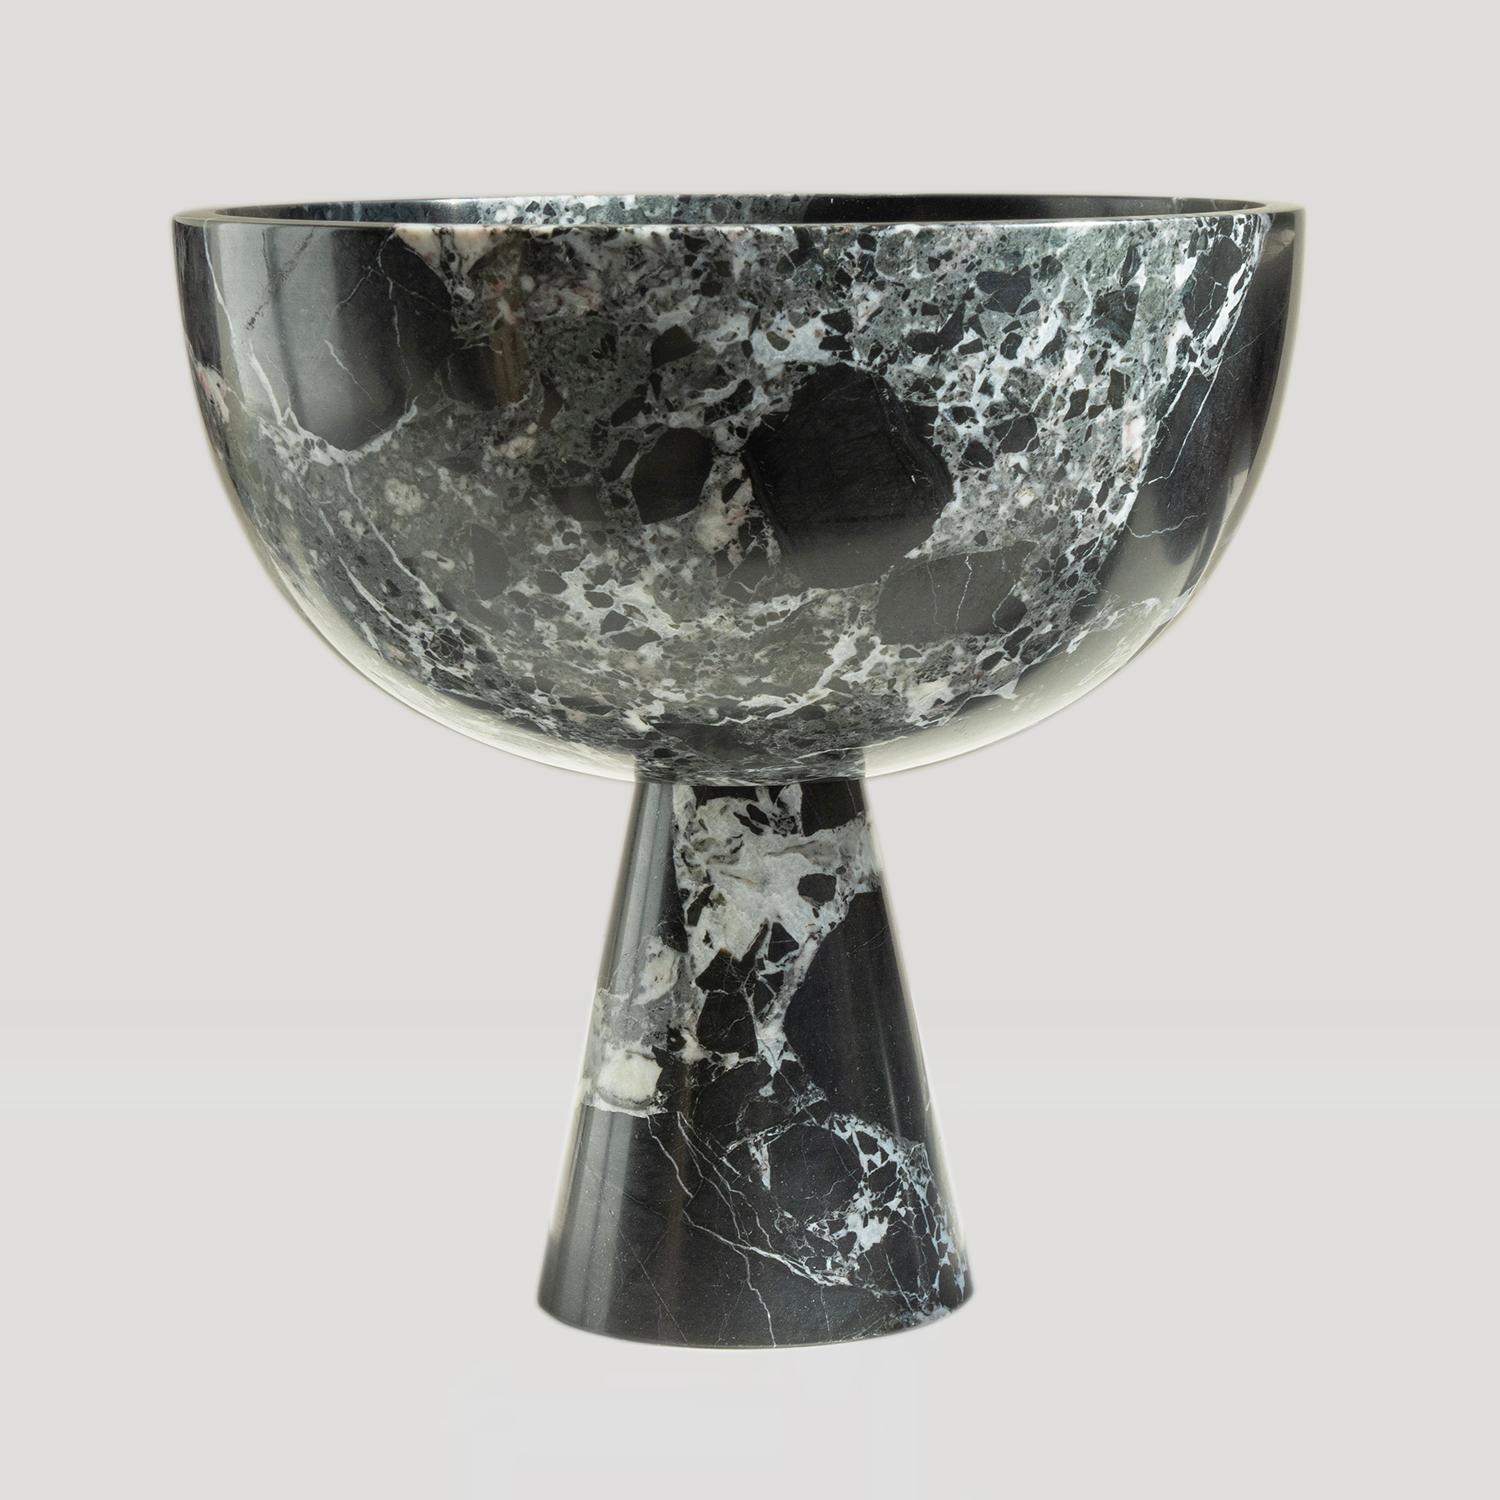 Introducing our stunning Black Marble Pedestal Bowl, a captivating fusion of style and utility. Crafted from premium black marble with deep green color nuances, this bowl boasts a unique and eye-catching aesthetic that instantly enhances any space.